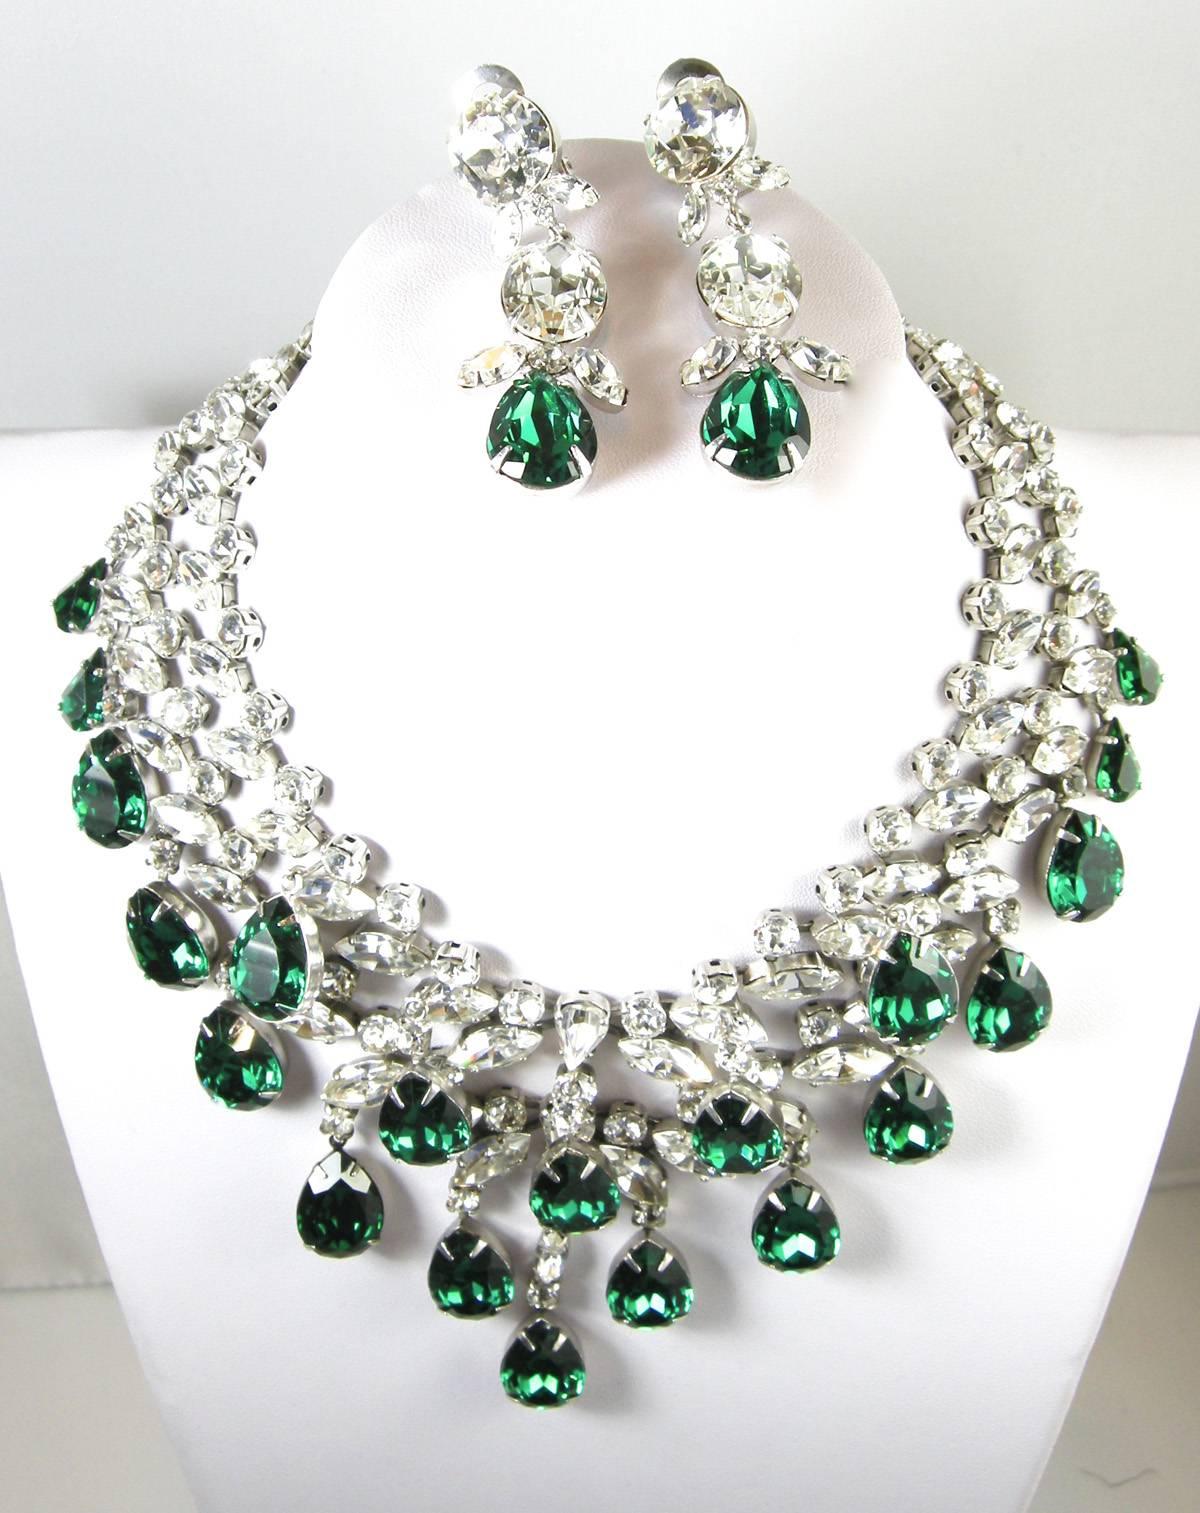 The collector who sold me her collection has superb taste and when I found this vintage Schreiner I almost fainted.  It is that gorgeous.  It has a 3-dimensional design with brilliant crystals and pear-shaped green crystals drops.  It is 17” long